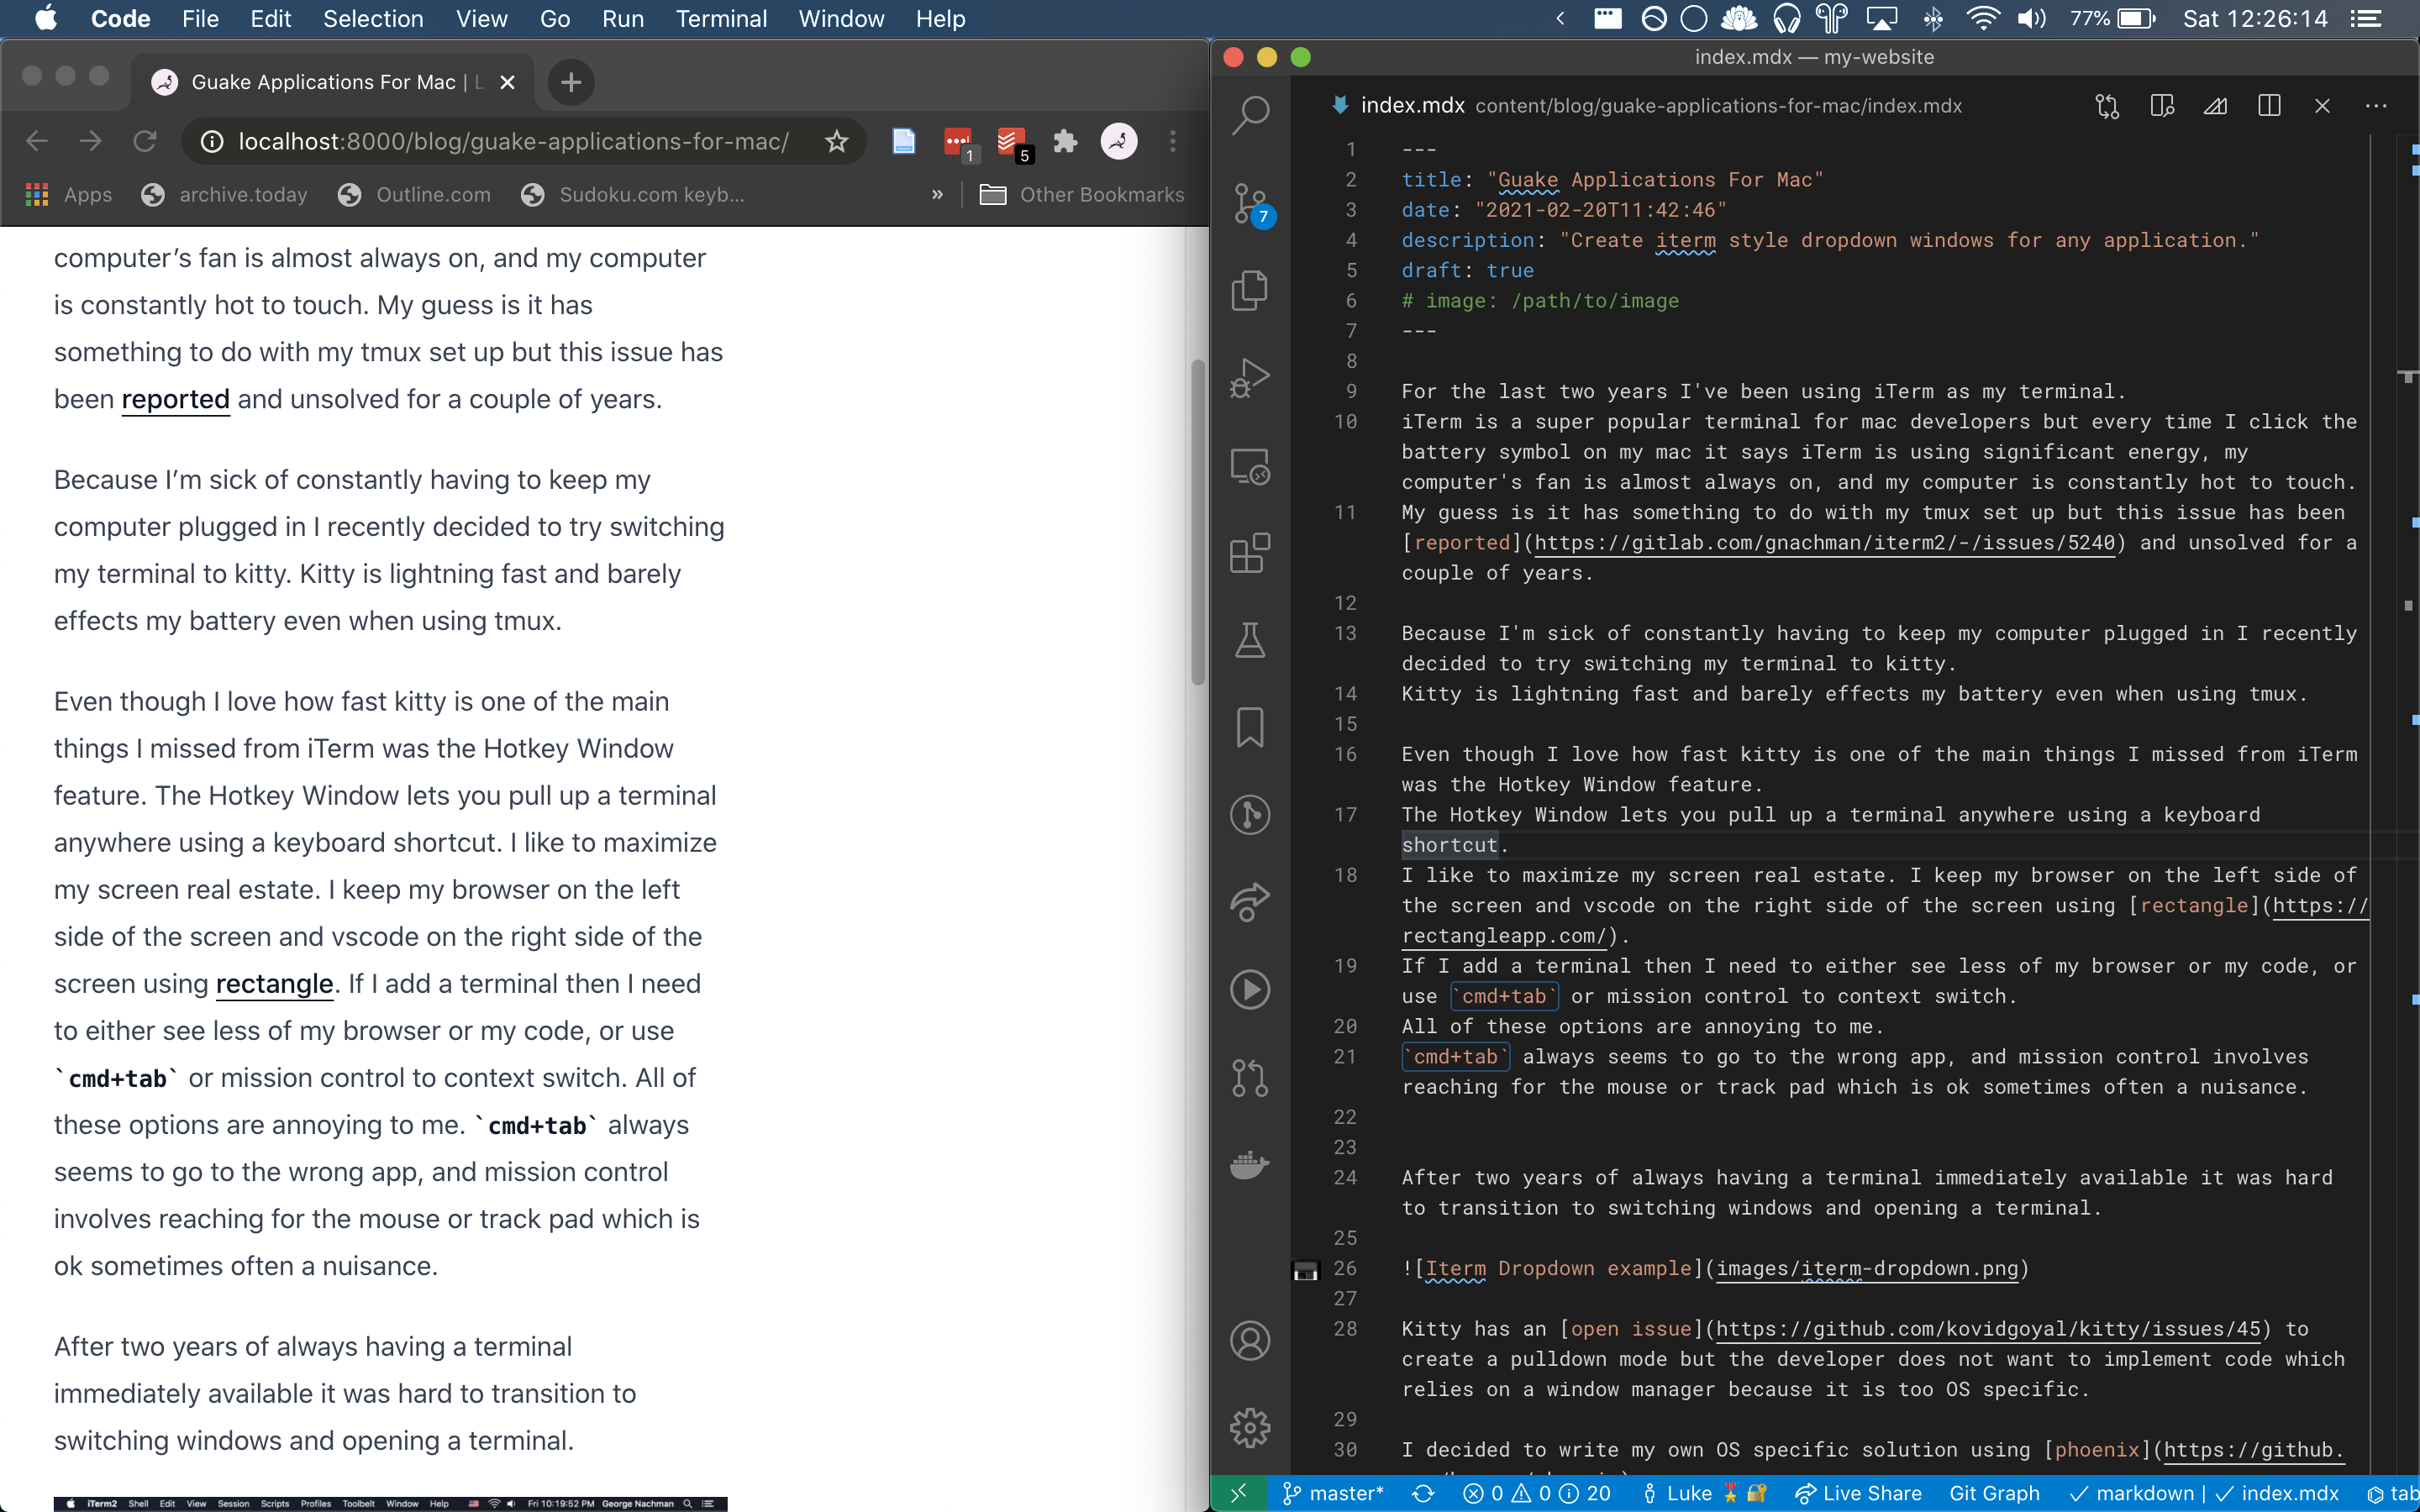 My usual setup with a browser on the left and vscode on the right